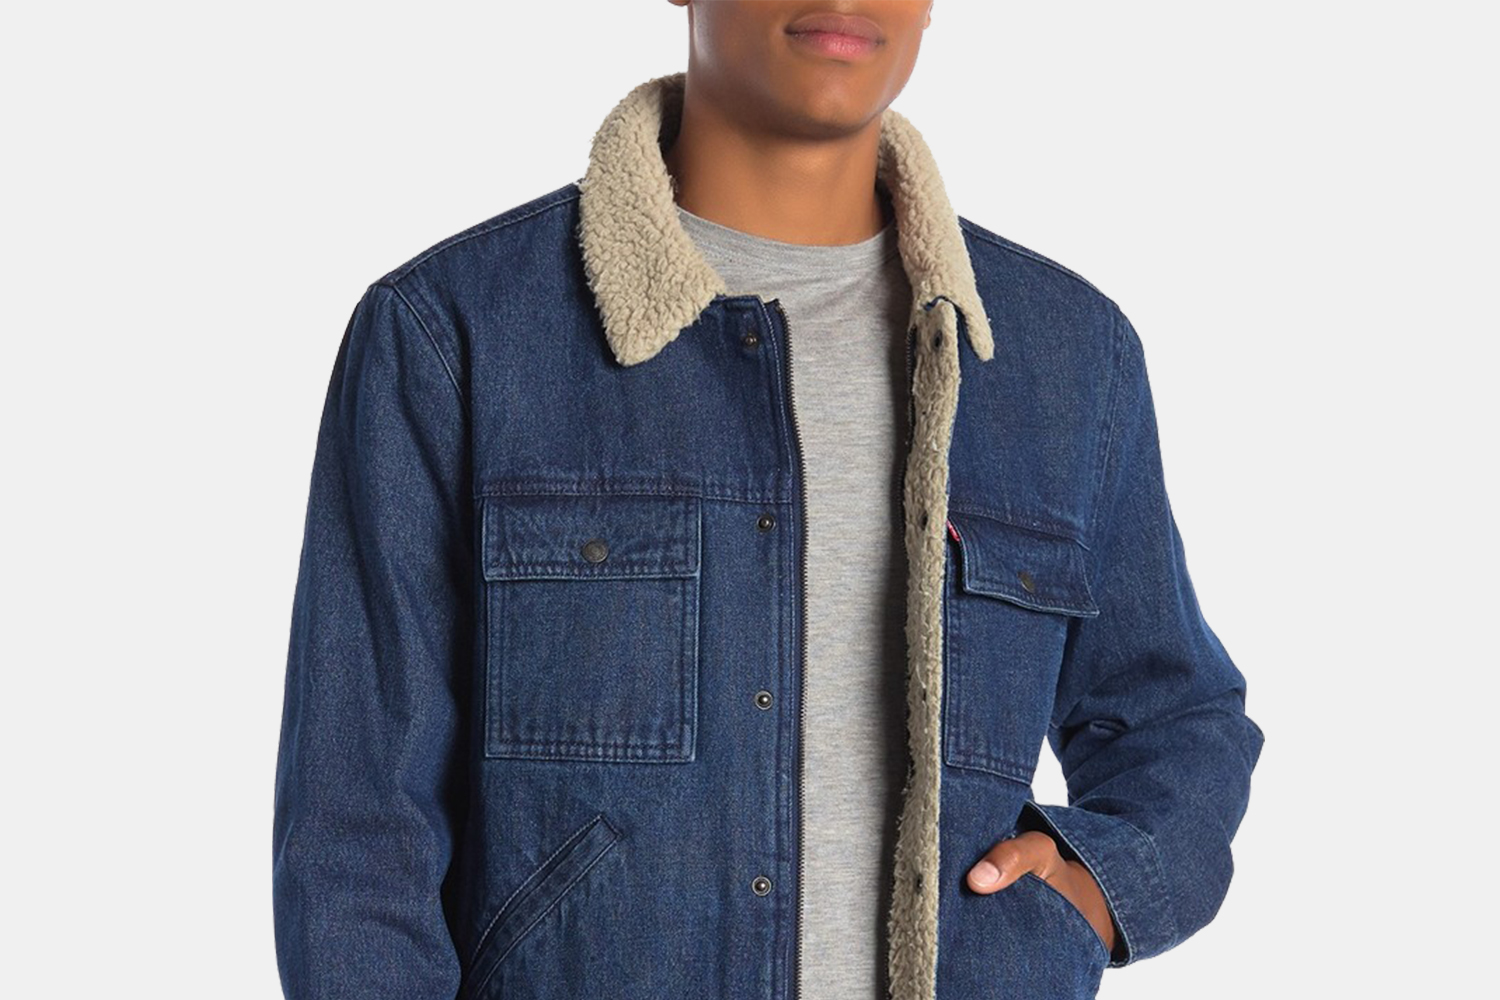 Levi's Sherpa-Lined Jackets Are 60% Off at Nordstrom Rack - InsideHook